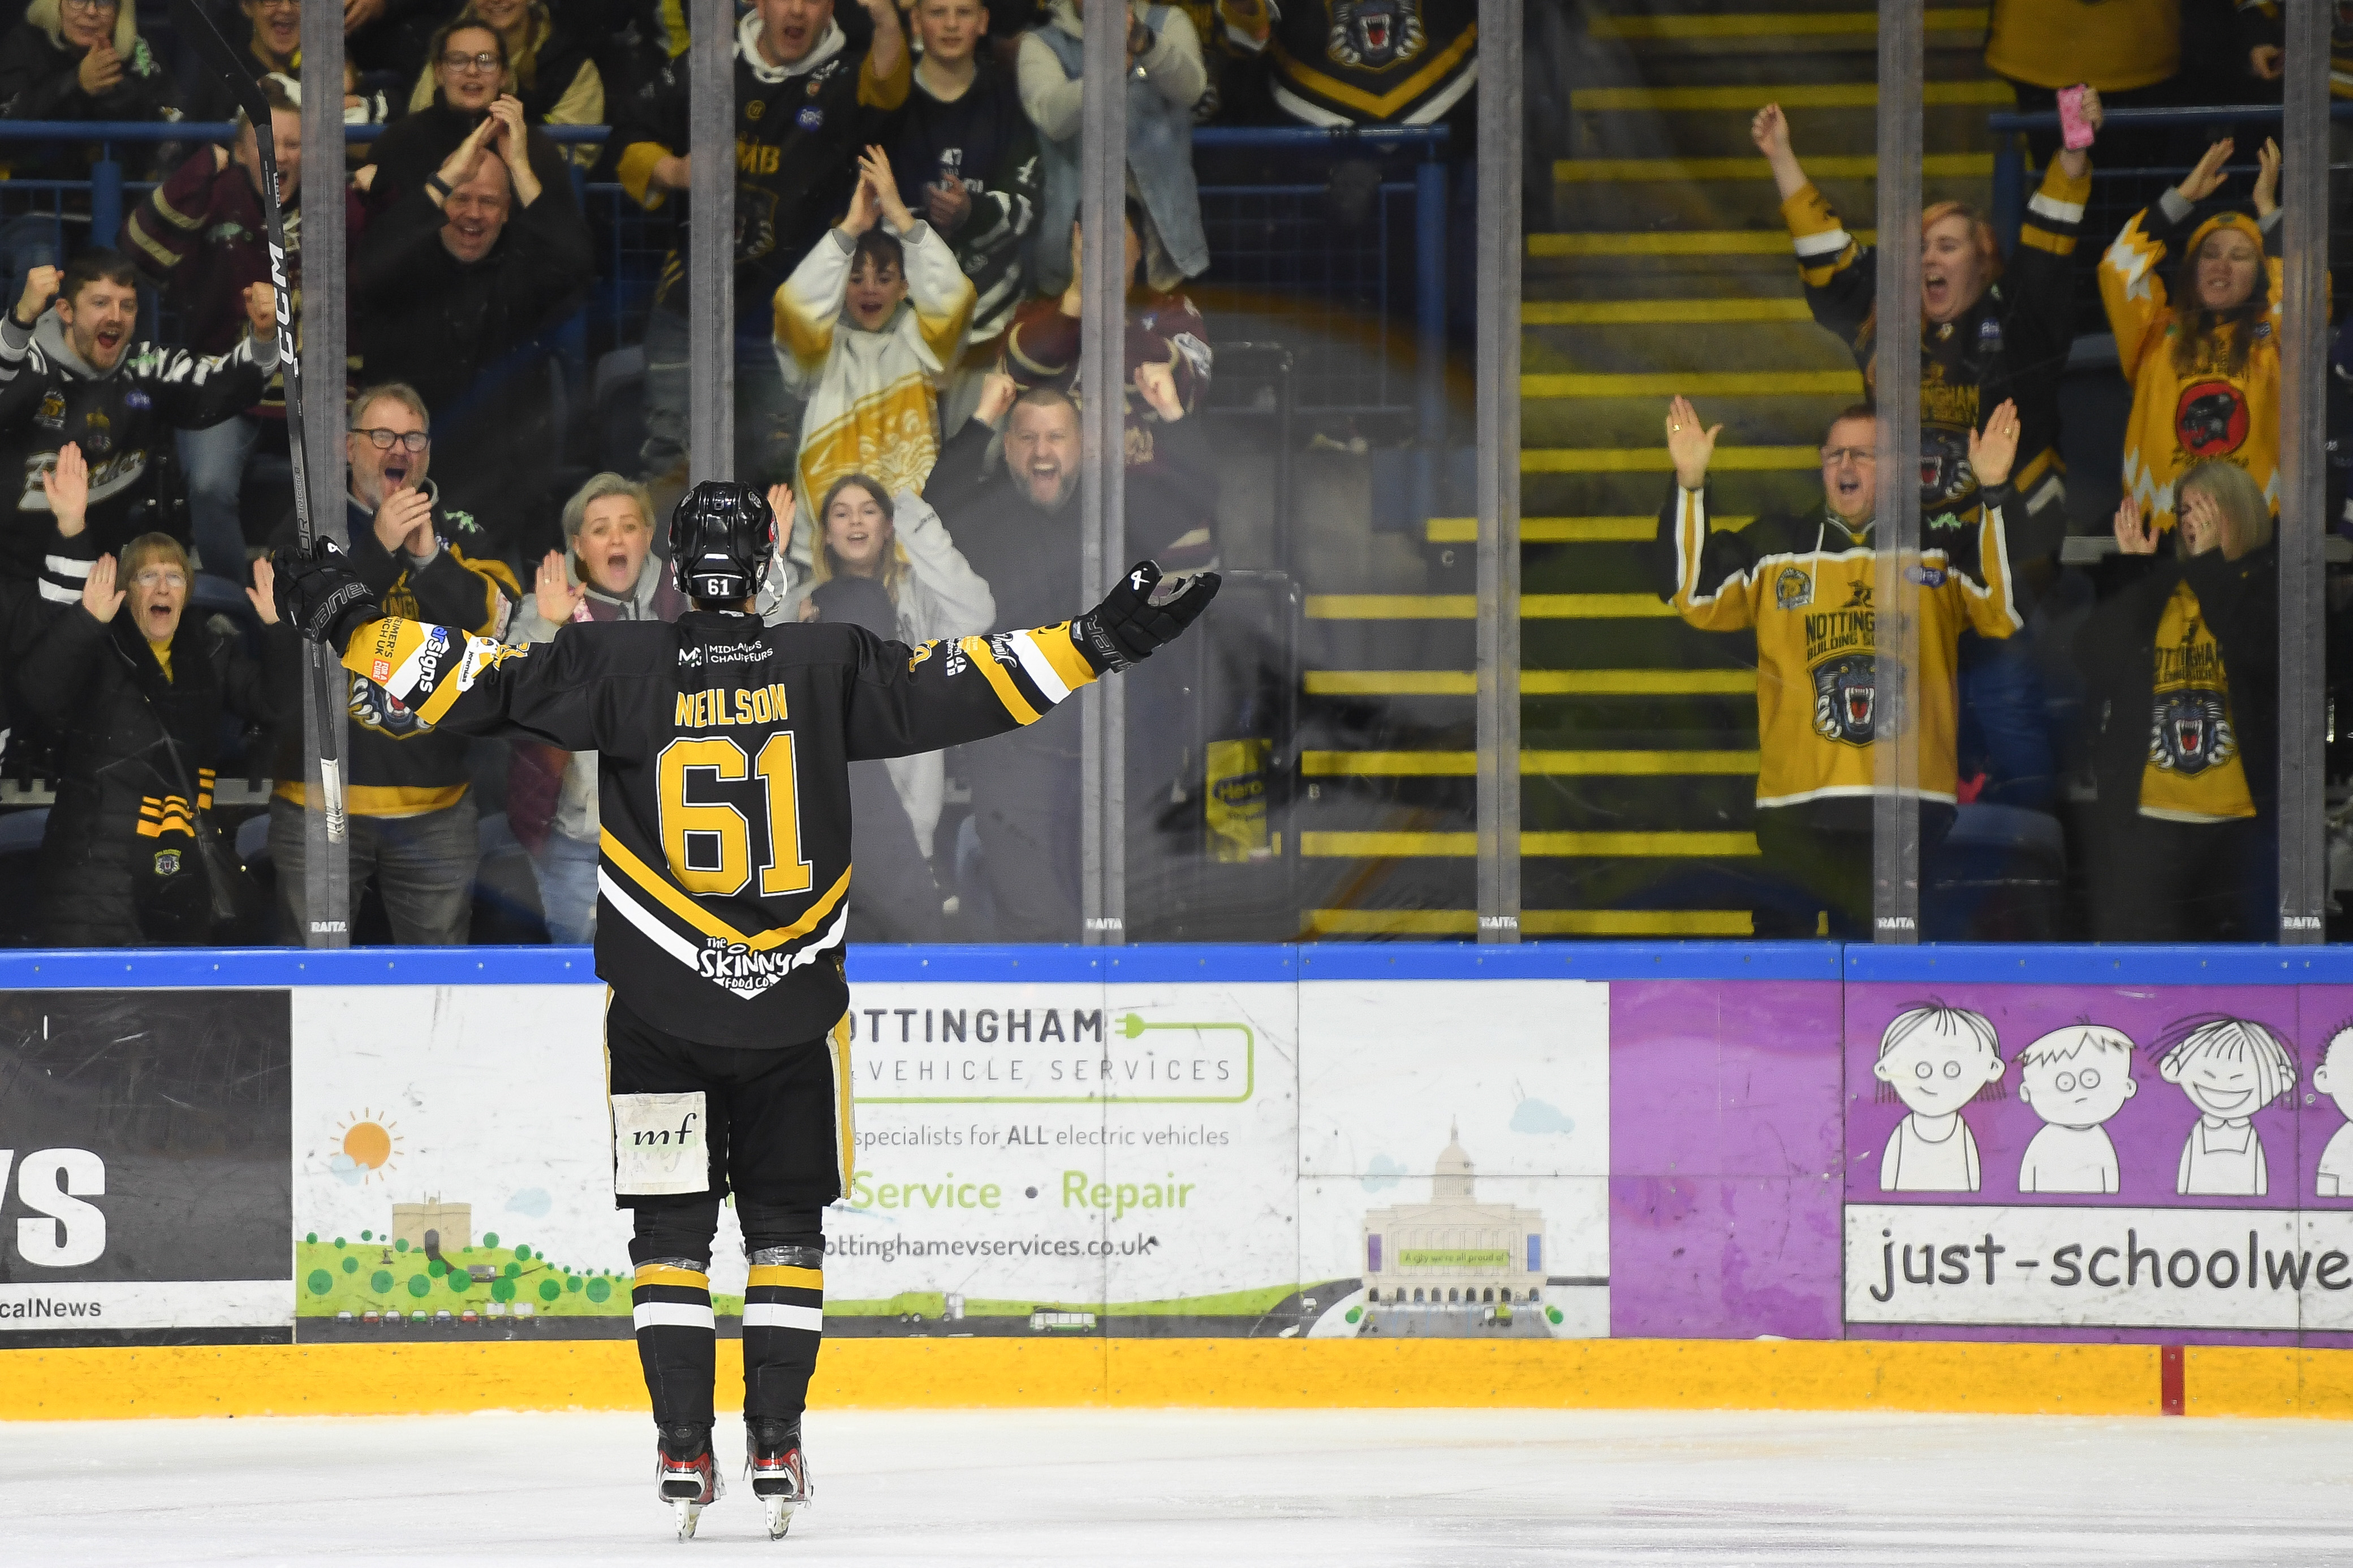 RELIVE THE HIGHLIGHTS FROM SUNDAY AS PANTHERS BEAT FIFE Top Image